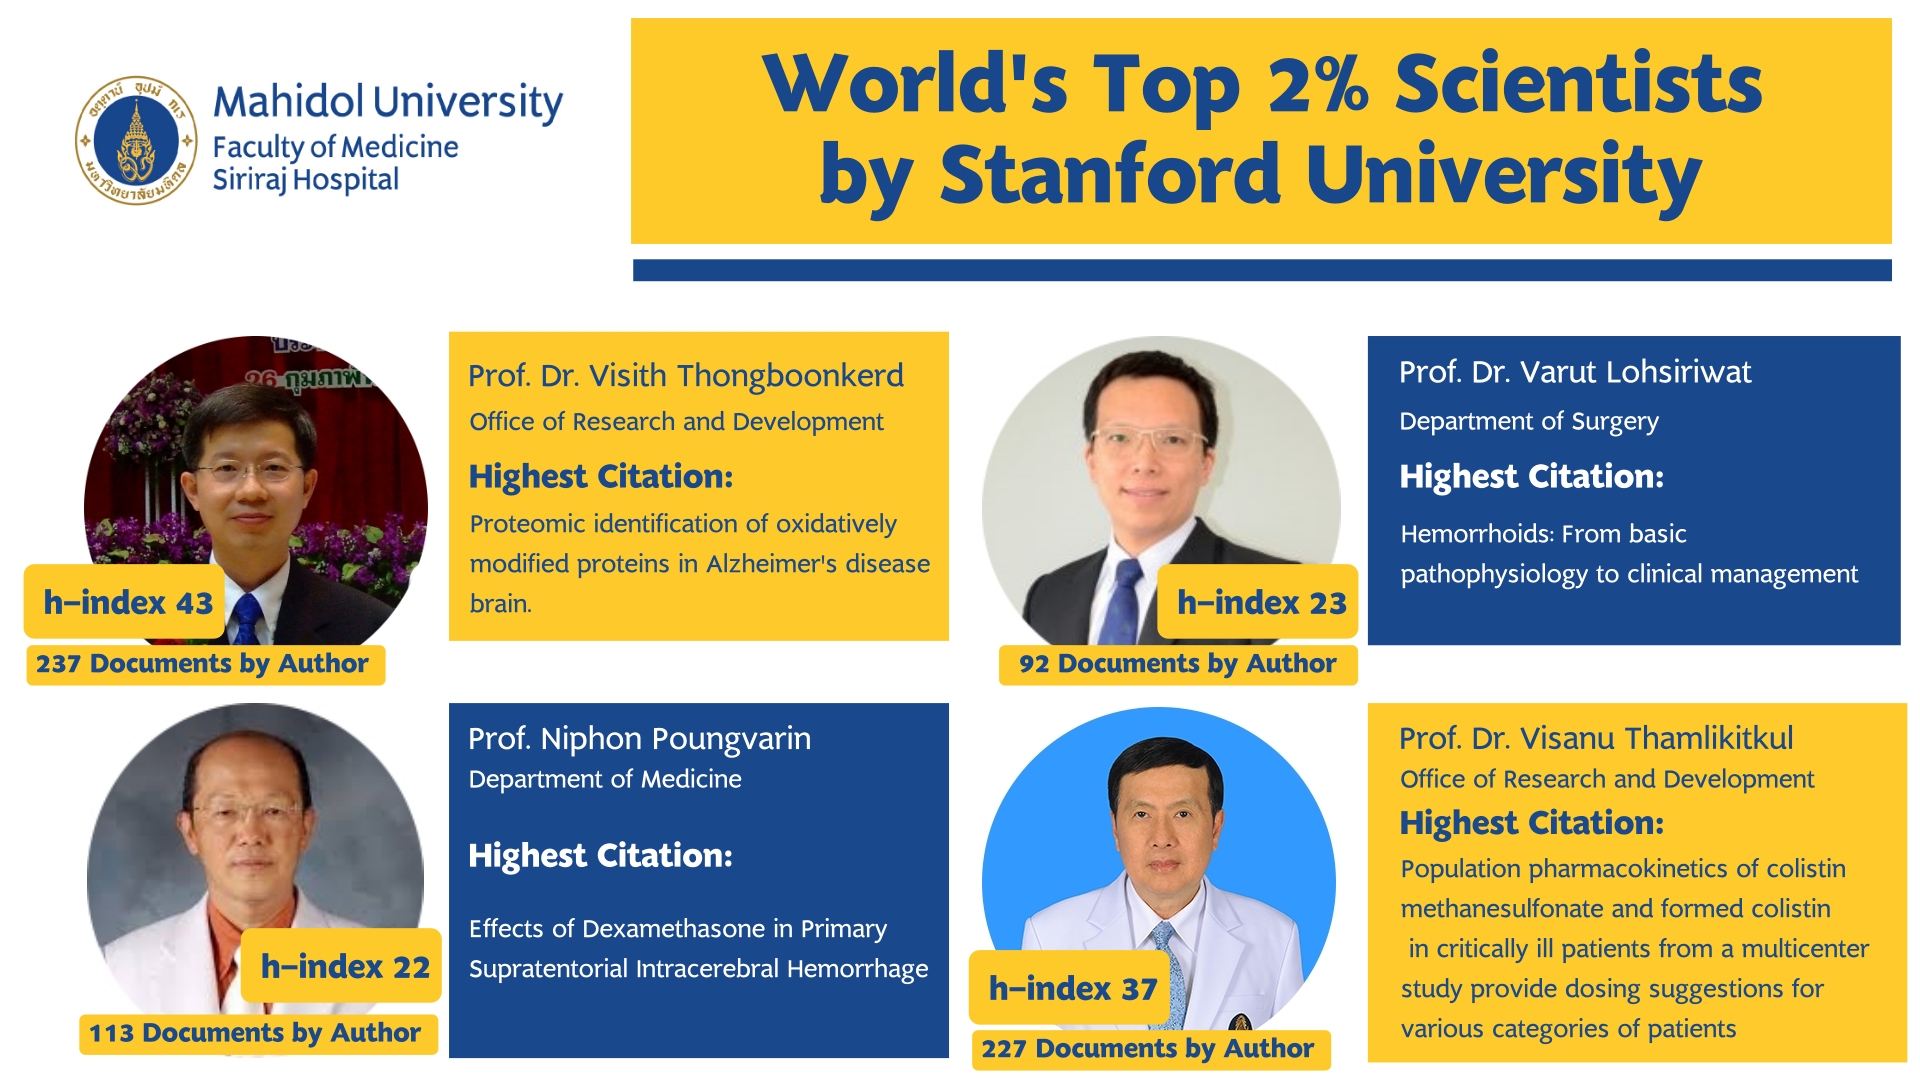 World’s Top 2% Scientists by Stanford University